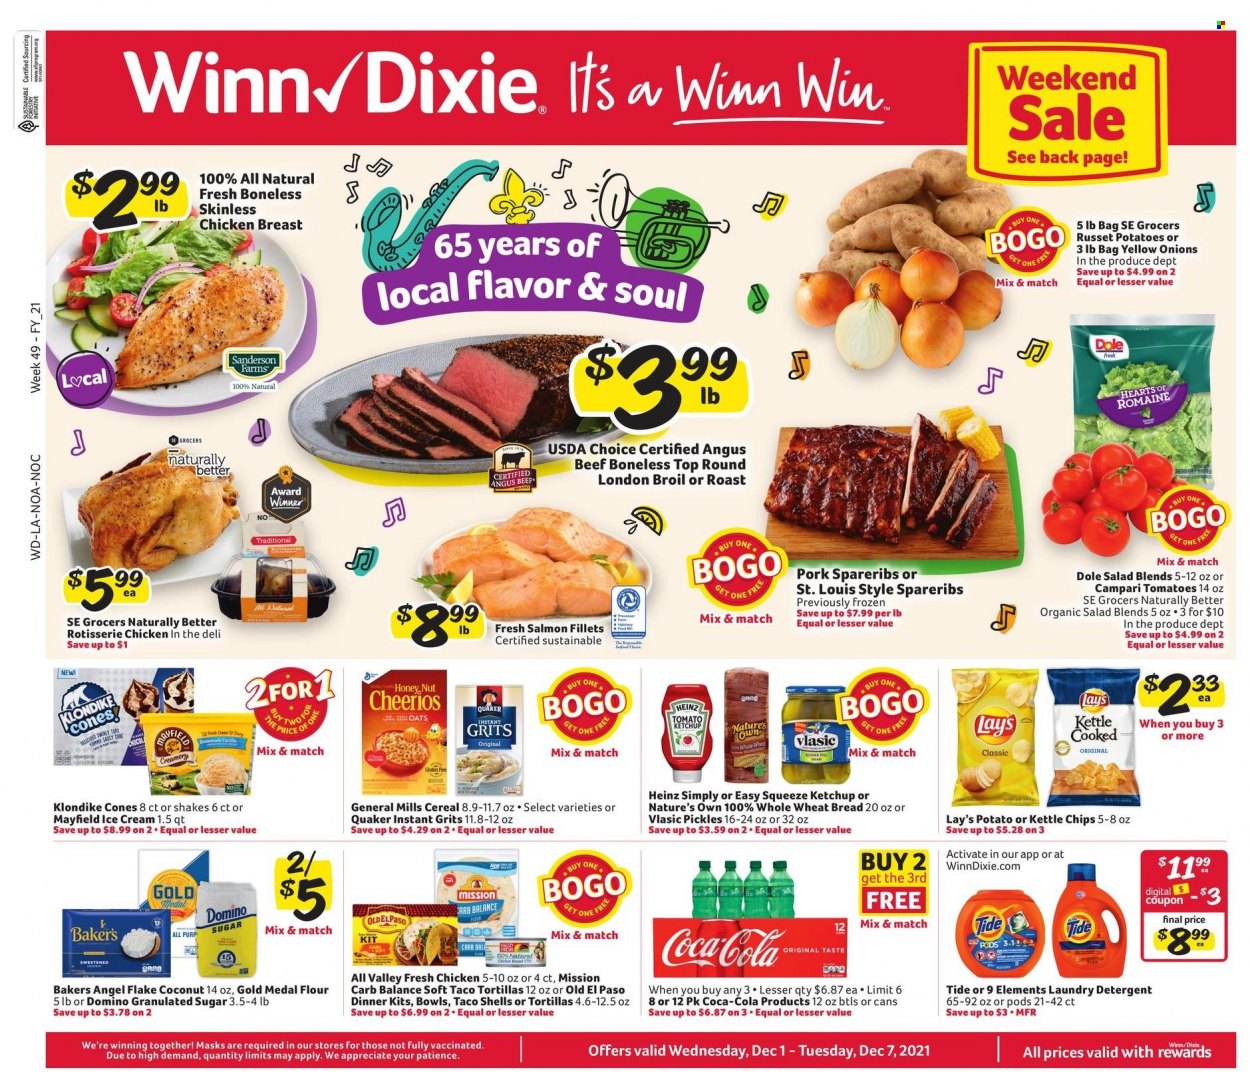 thumbnail - Winn Dixie Flyer - 12/01/2021 - 12/07/2021 - Sales products - tortillas, wheat bread, Old El Paso, russet potatoes, tomatoes, potatoes, onion, salad, Dole, coconut, salmon, salmon fillet, chicken roast, dinner kit, Quaker, shake, ice cream, Lay’s, granulated sugar, sugar, oats, grits, Heinz, pickles, cereals, Cheerios, ketchup, Coca-Cola, chicken breasts, beef meat, pork spare ribs, detergent, Tide, laundry detergent, Bakers, Nature's Own. Page 1.